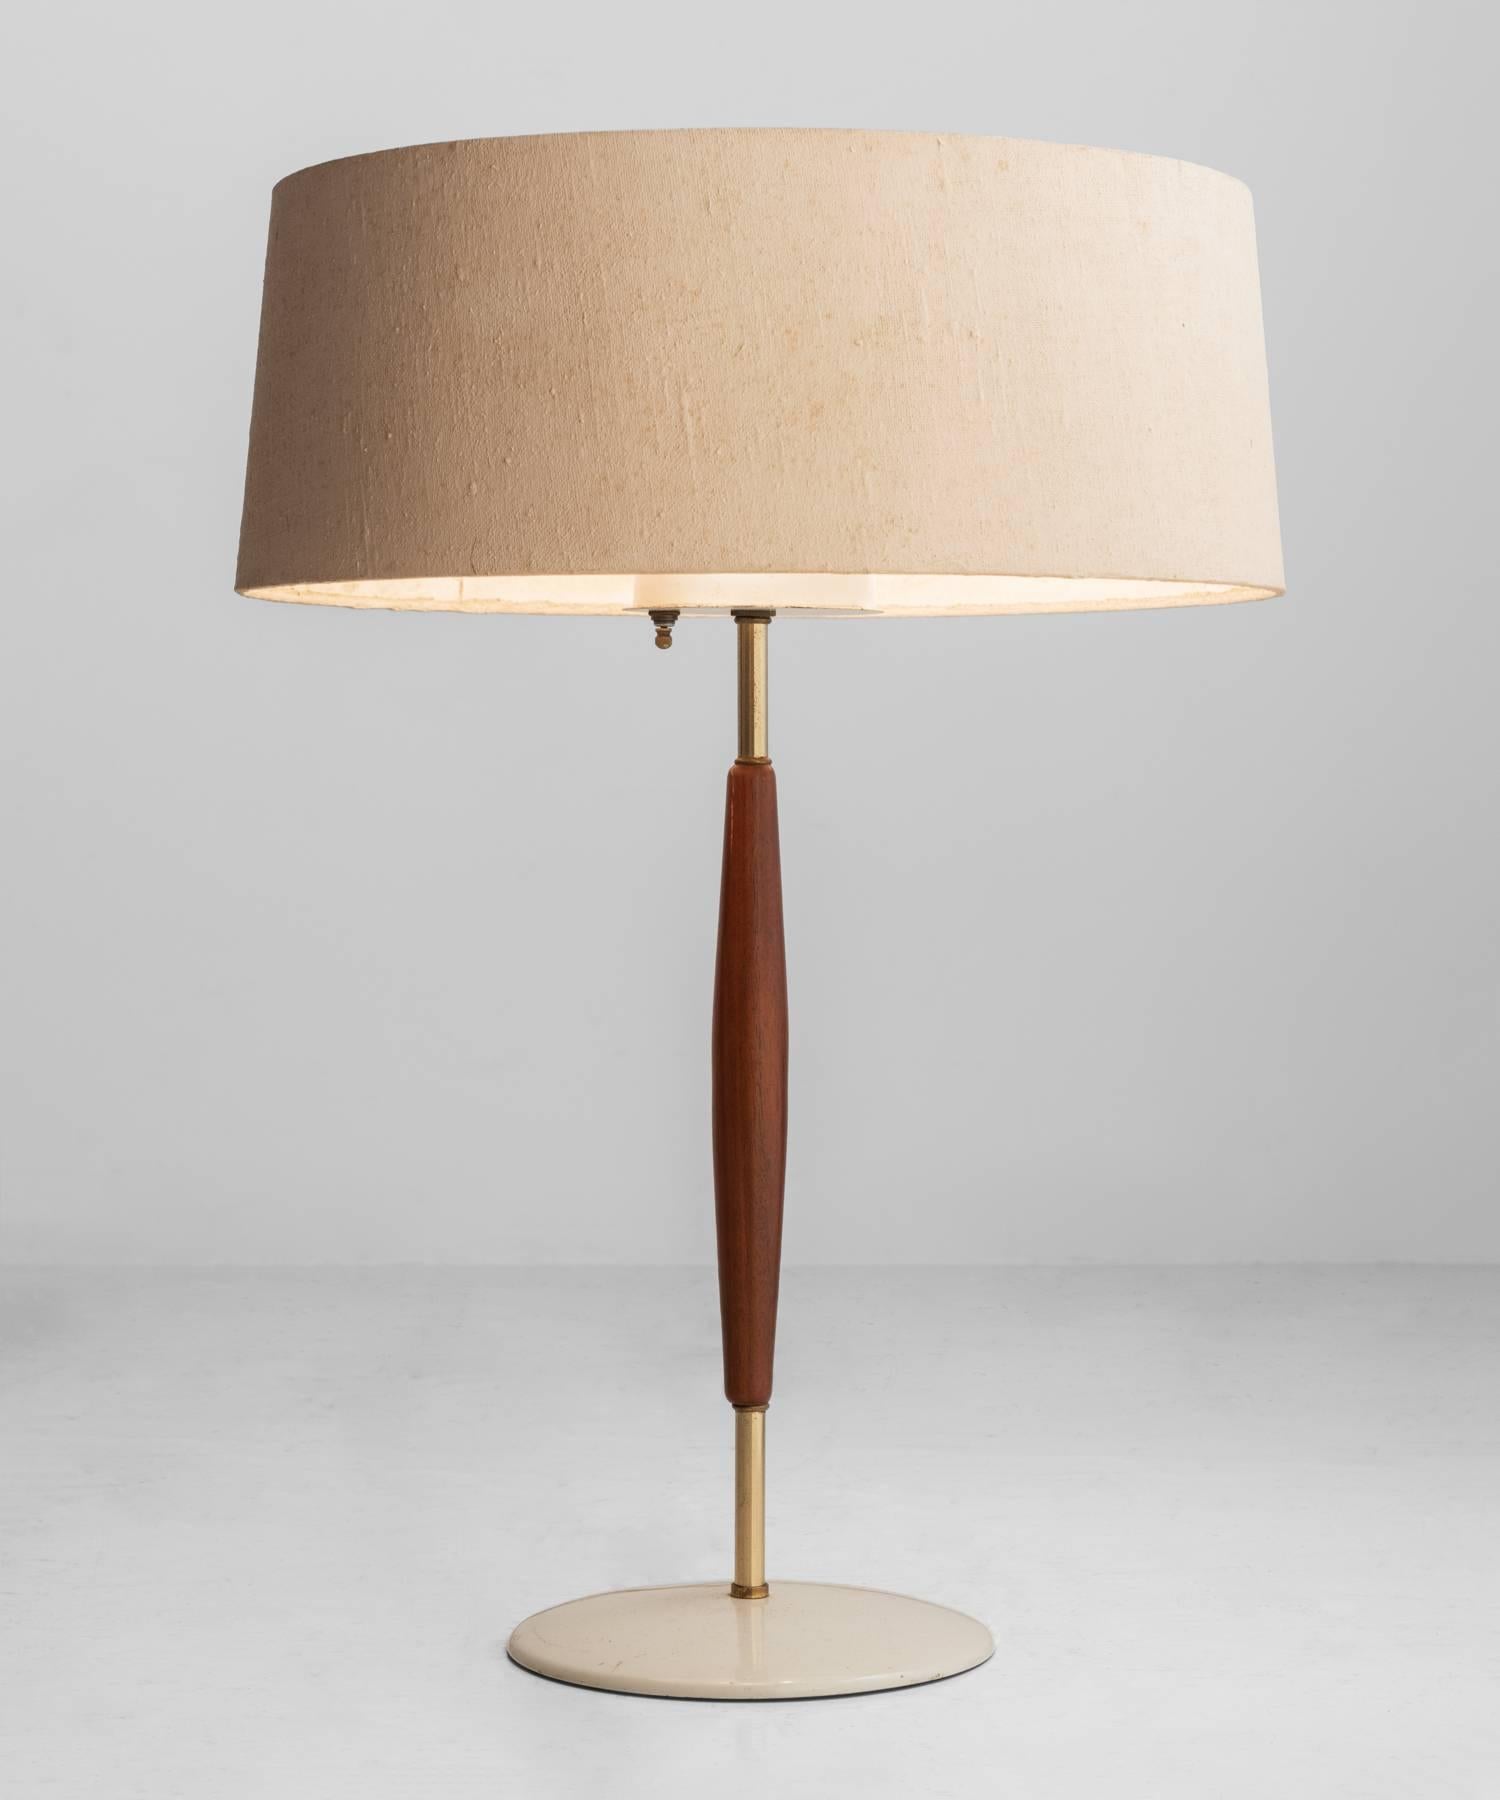 Gerald Thurston table lamp, America, circa 1960.

Linen wrapped shade with white steel diffuser, on walnut and brass base.